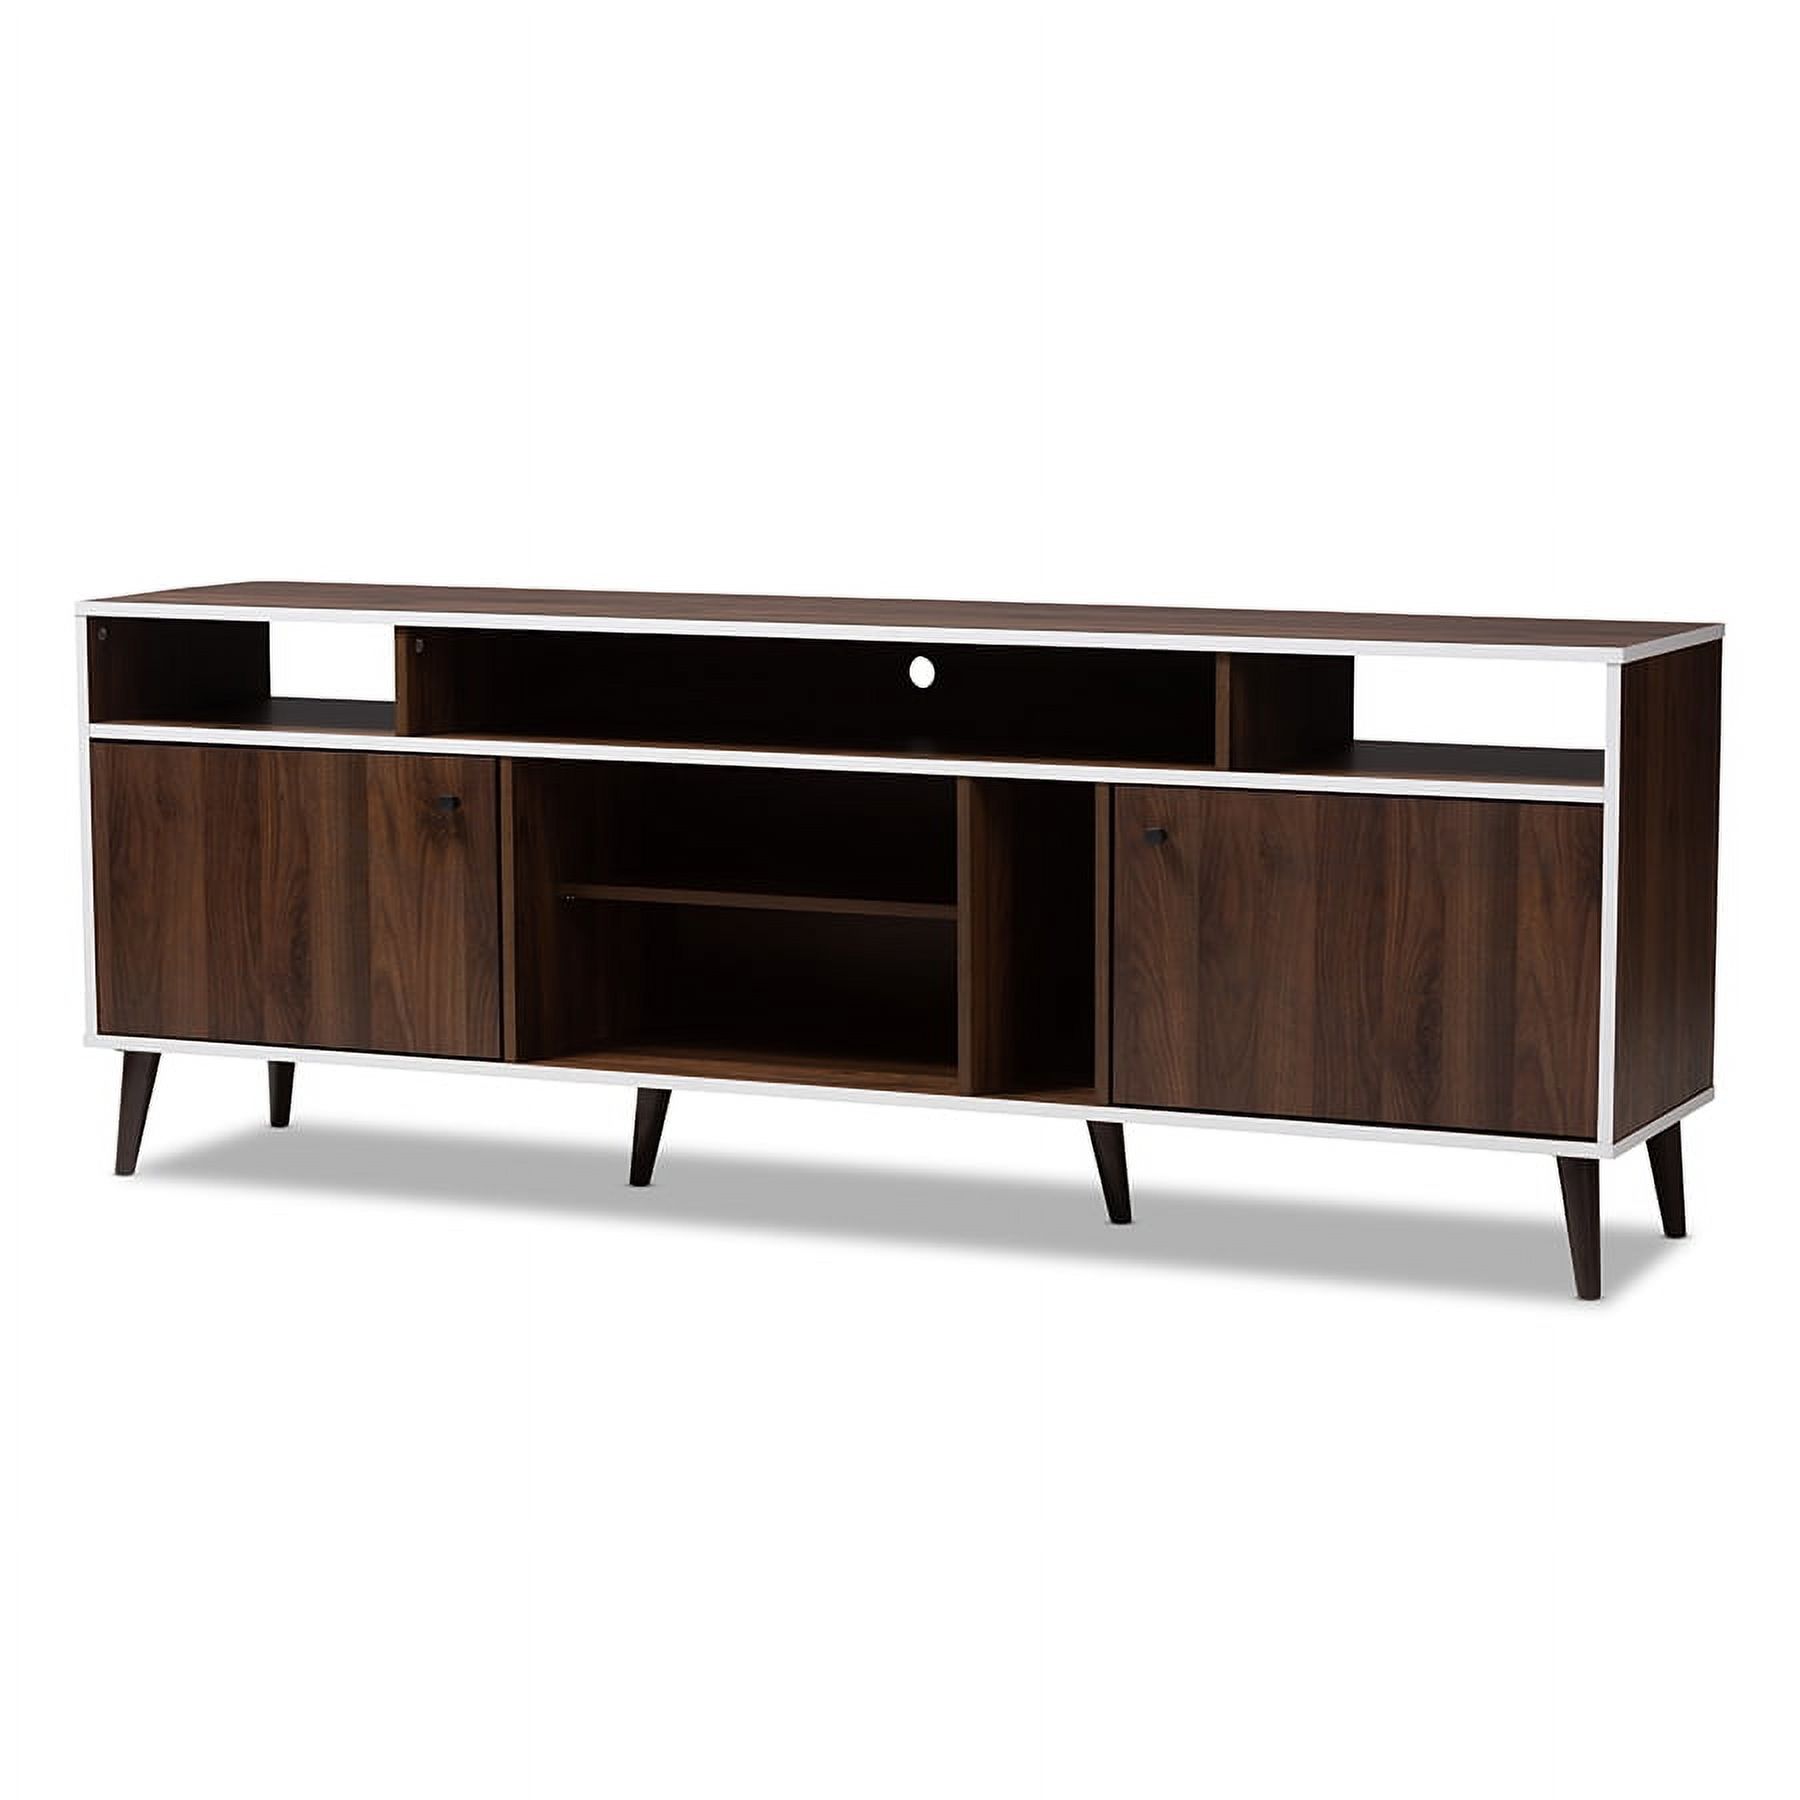 Baxton Studio Marion Mid-Century Modern Brown and White Finished TV Stand - image 2 of 7